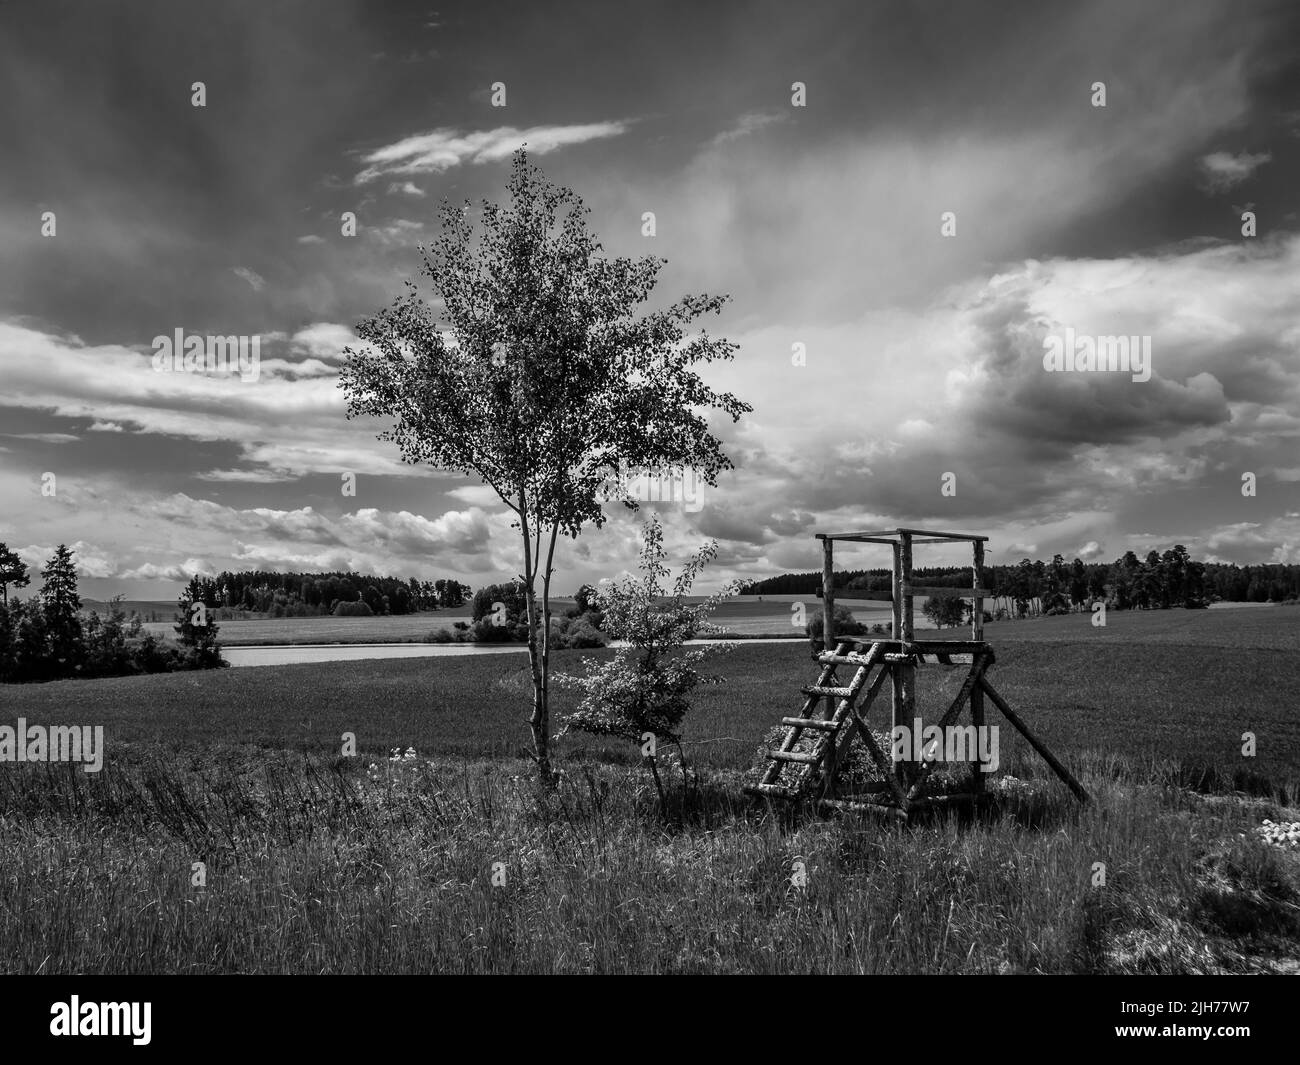 Landscape with Trees, Fields and Raised Perch in Western Bohemia near Malkovice, Czech Republic in Monochrome Black and White Stock Photo